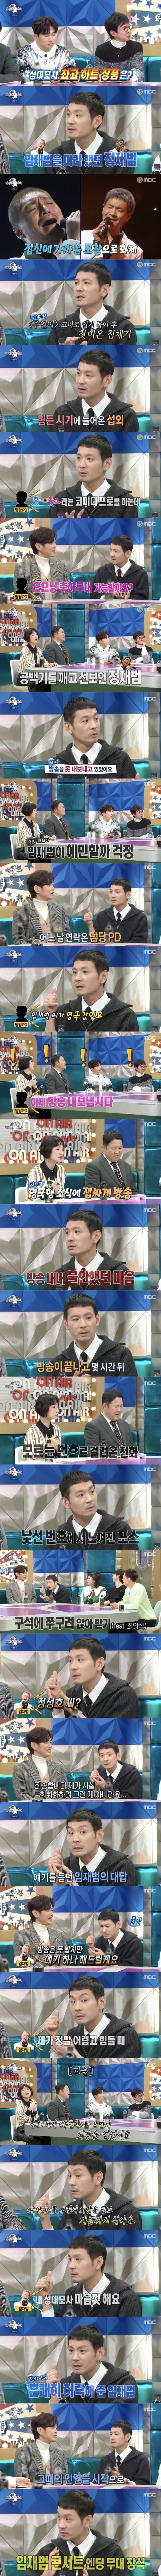 Behind the scenes of Jung Sung Ho's impersonation of Lim Jae Bum.jpg